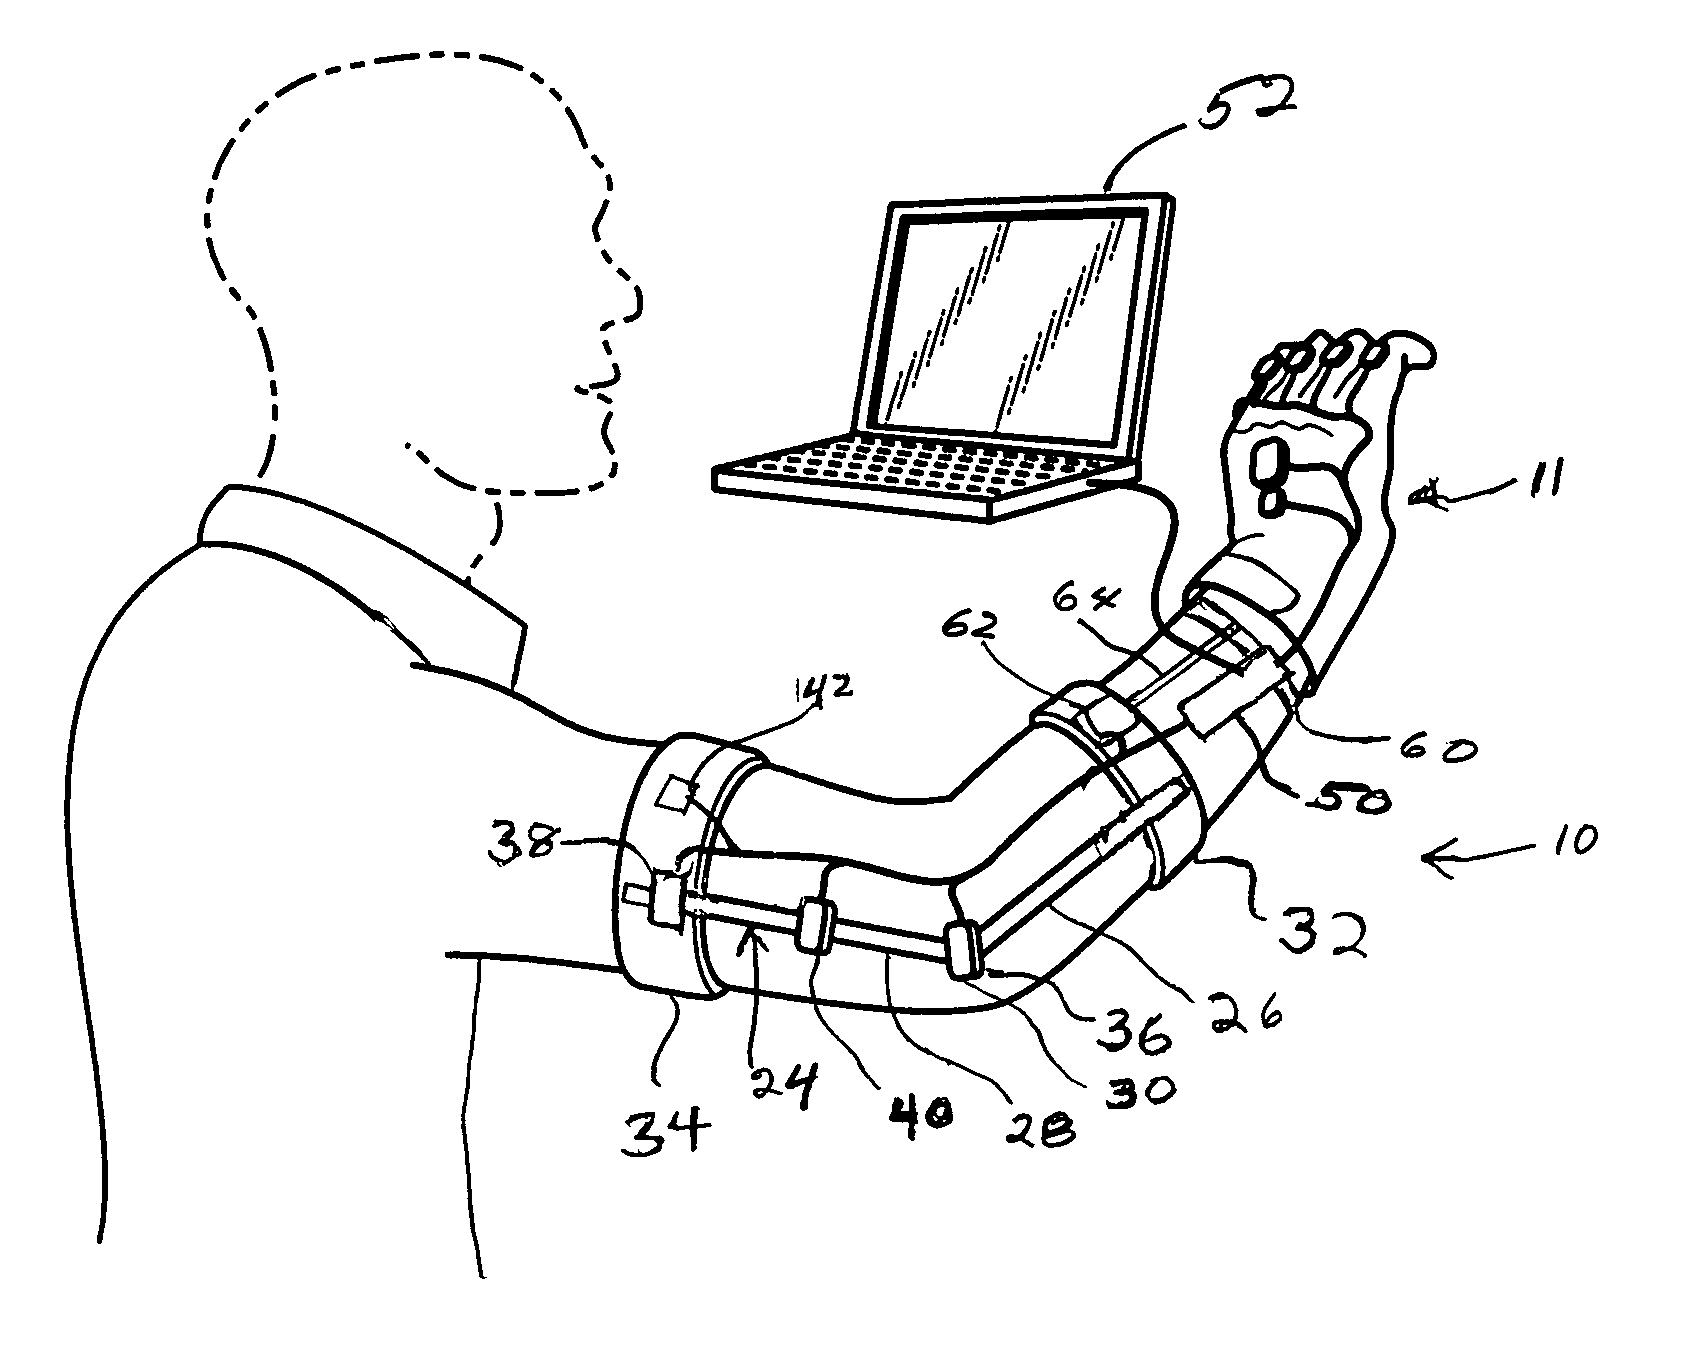 Method and apparatus for translating hand gestures